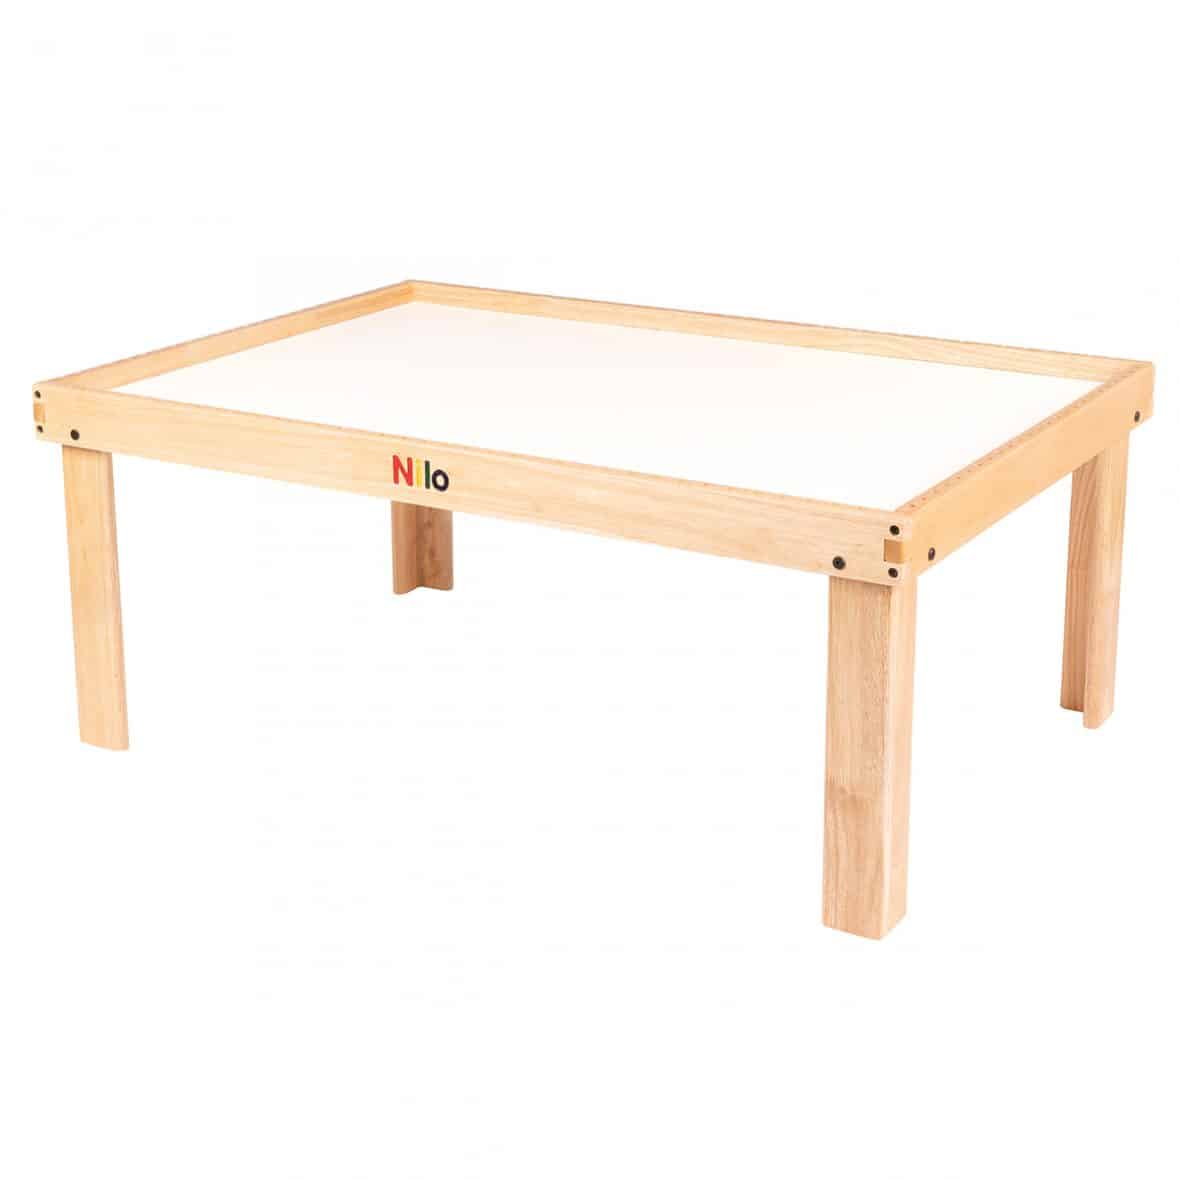 activity table for kids, toddler play table, toddler table, toy table, kids play table, kids train table, table for kids